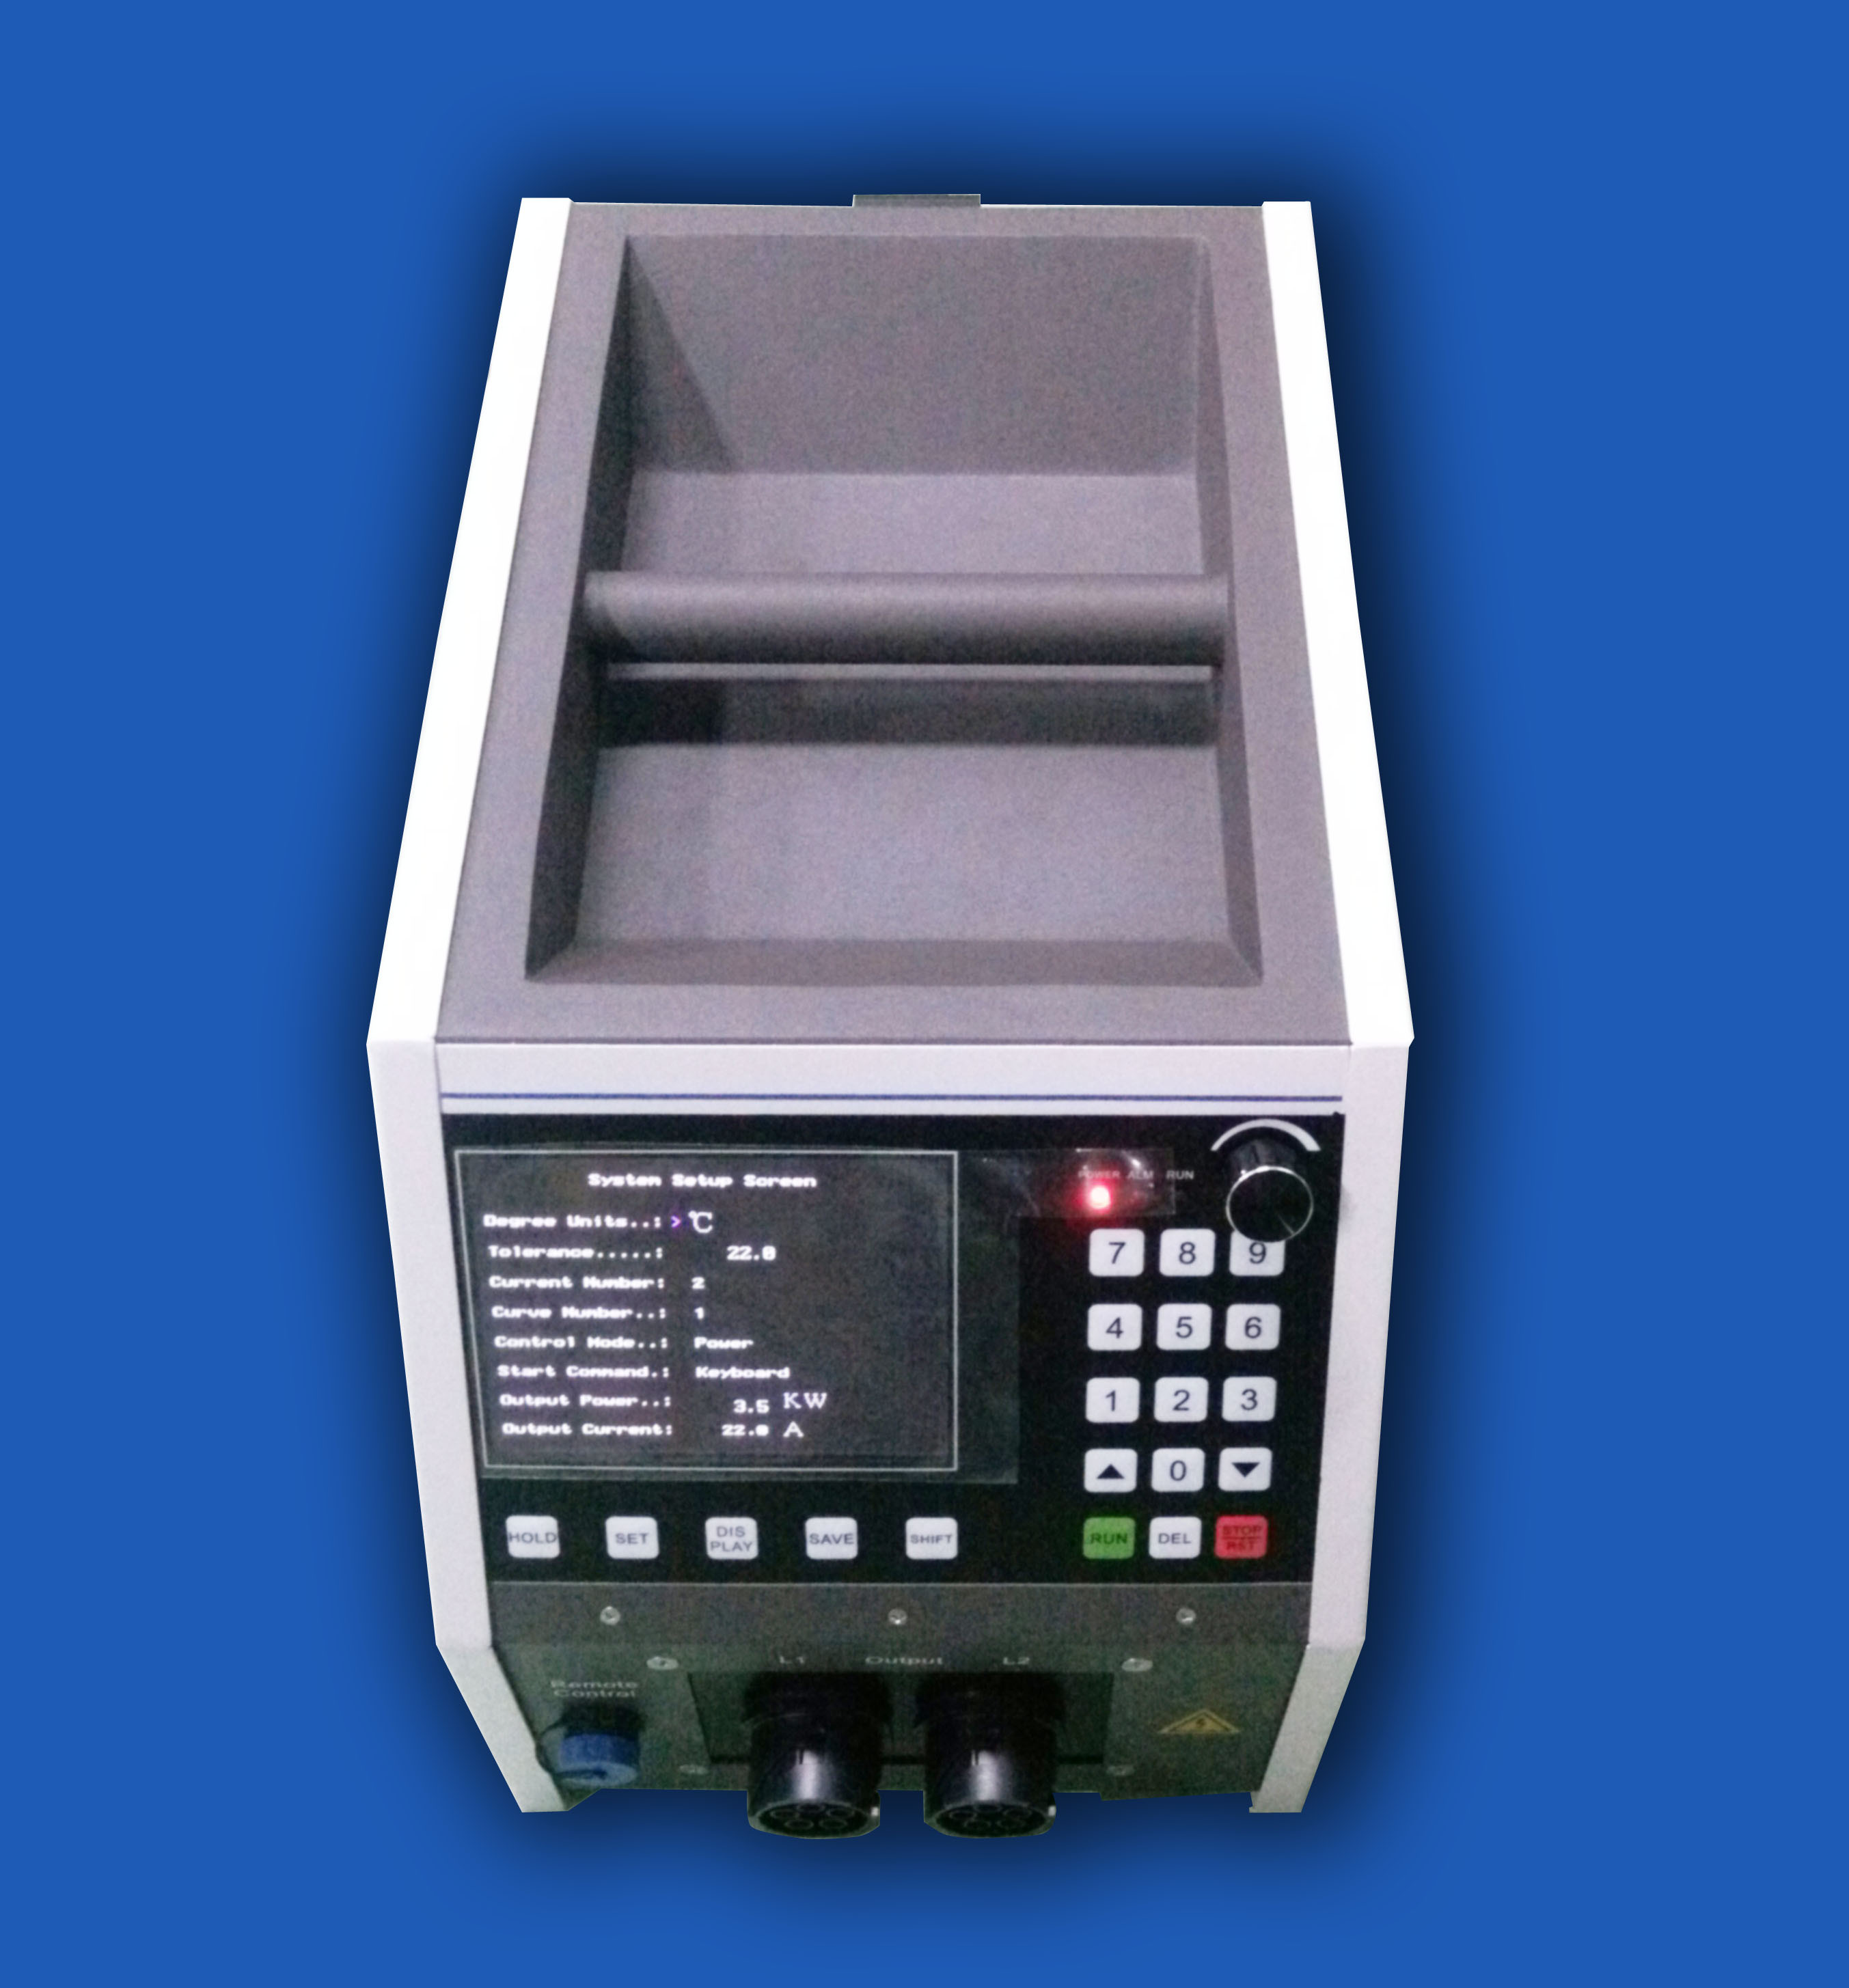 Buy Portable Medium Frequency Induction Heating Machine For Preheating Valve Body to 400°F at wholesale prices